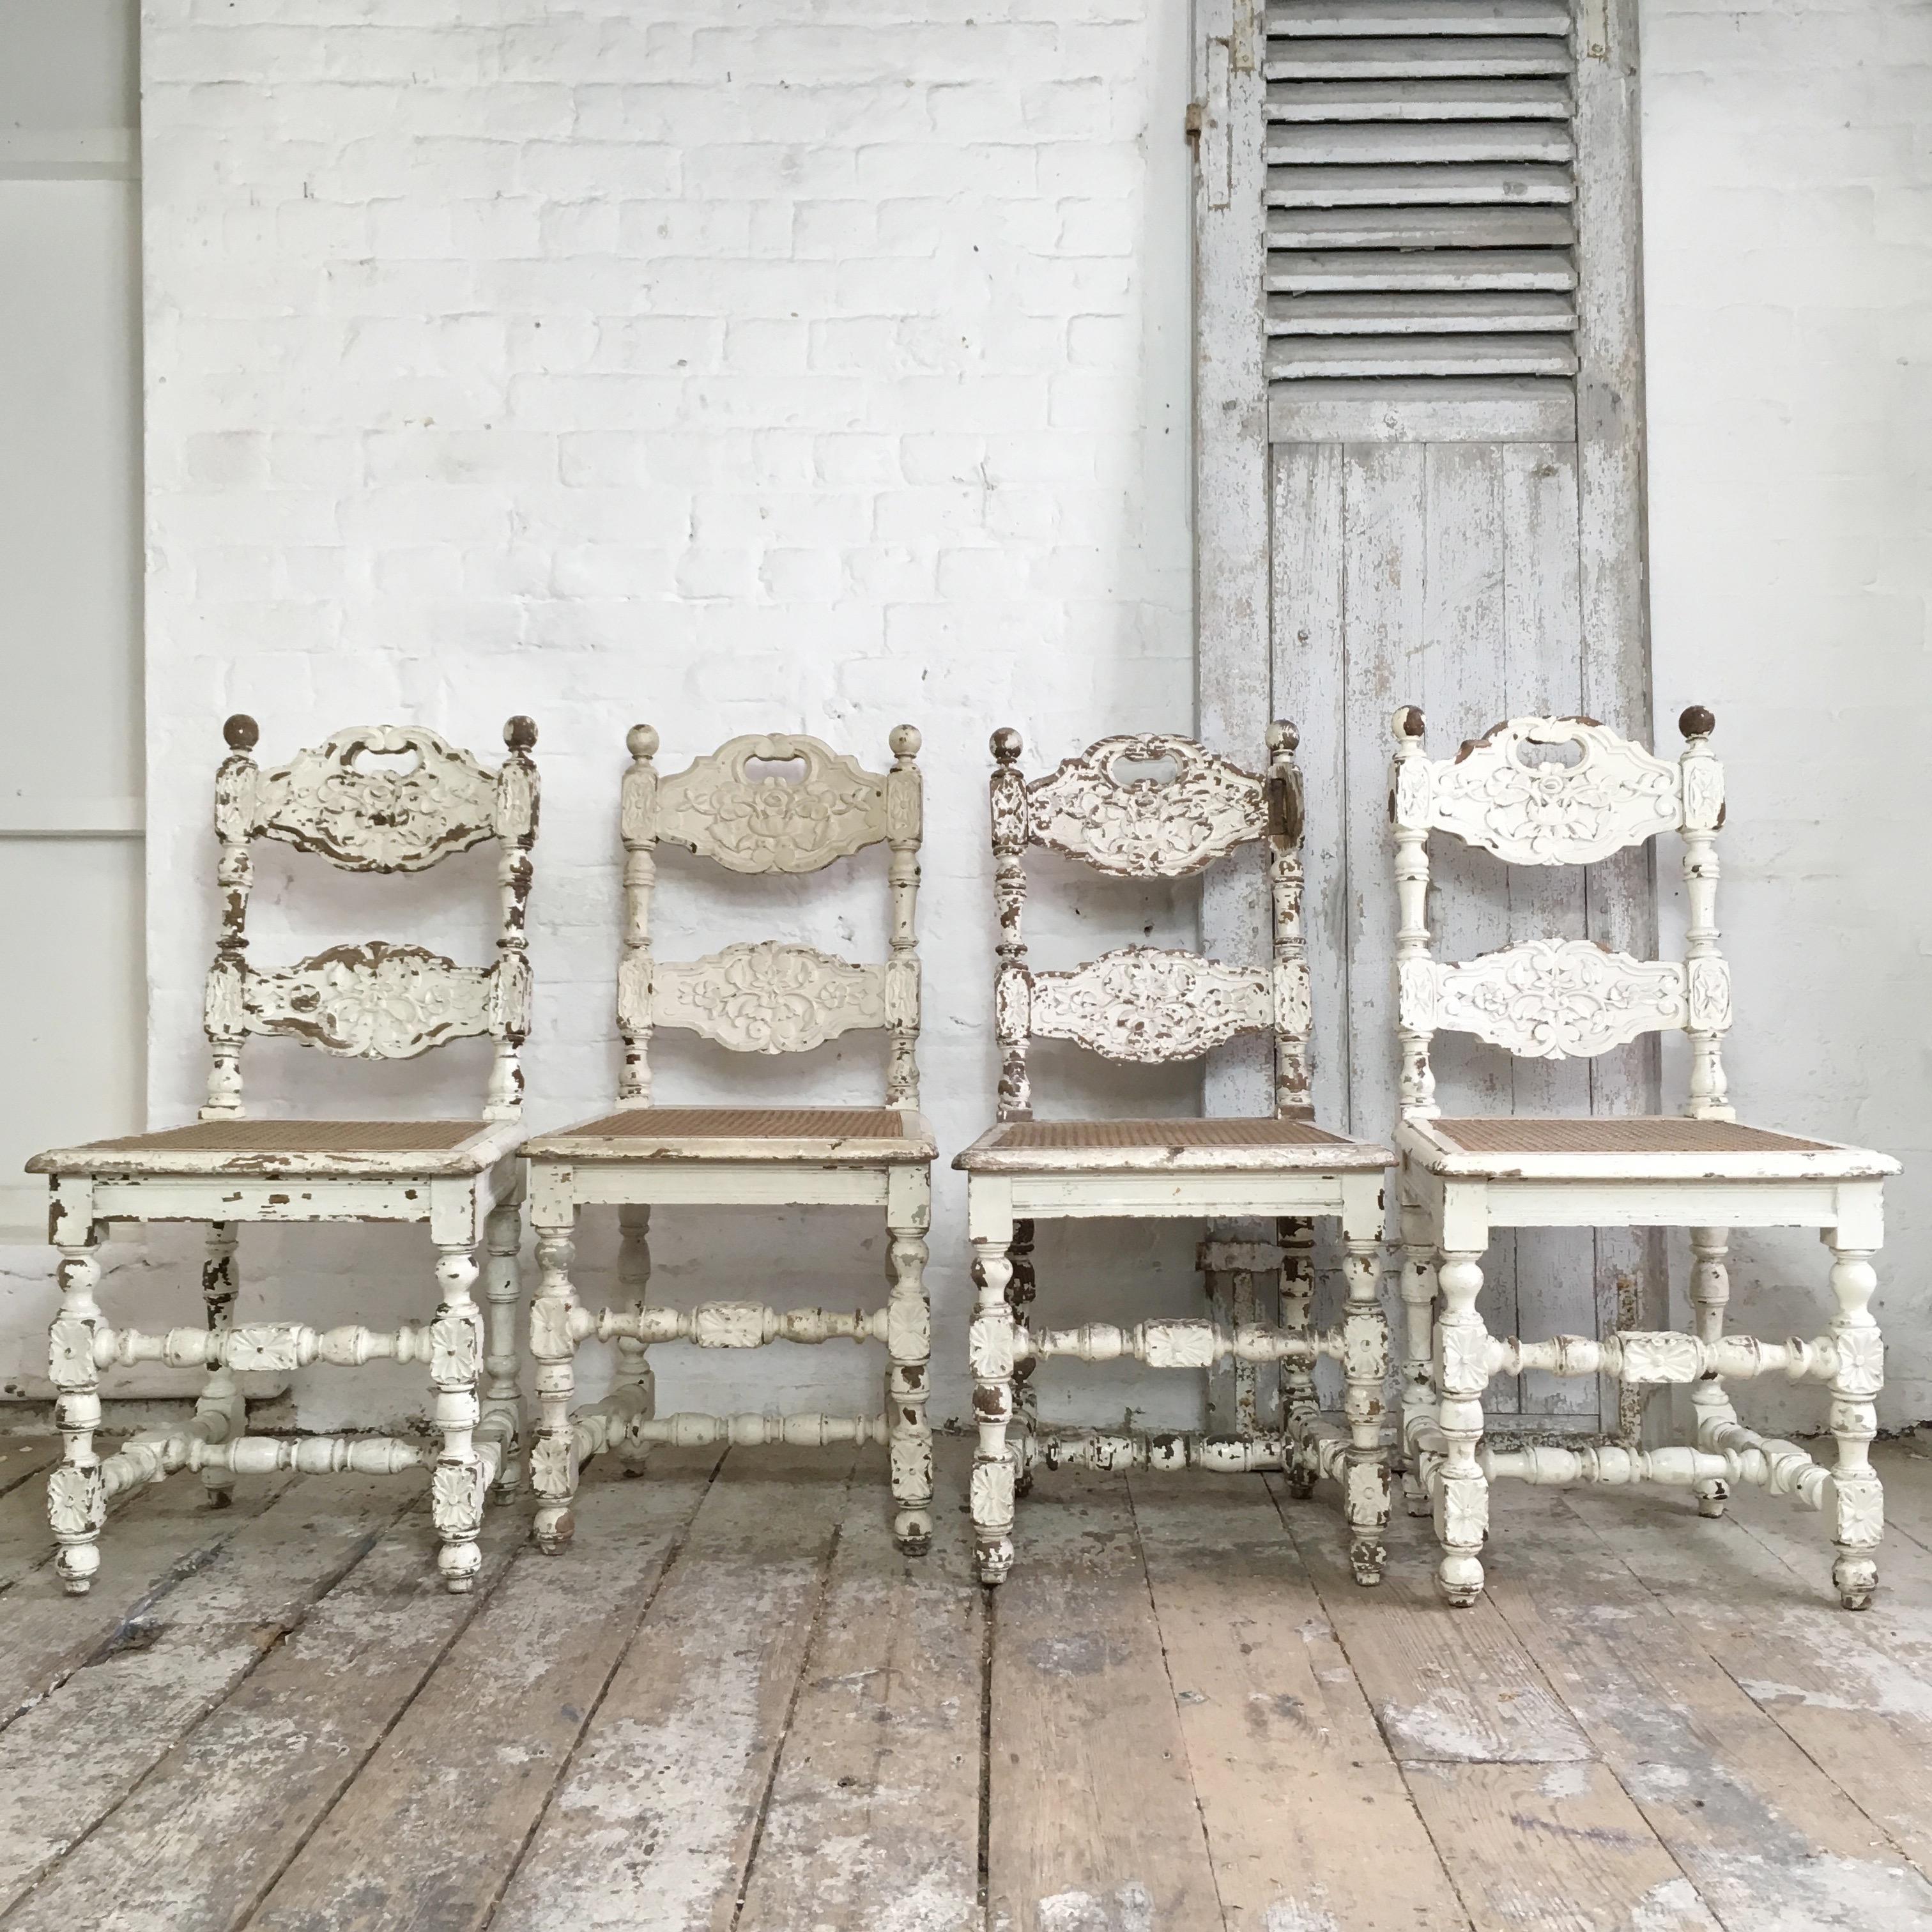 Set of four early 19th century French carved oak dining chairs.
The price is for the set of four chairs. 
Intricate and heavily carved dining chairs. 
The chairs have beautiful floral carvings and turned legs with shaped backs and cut out handle